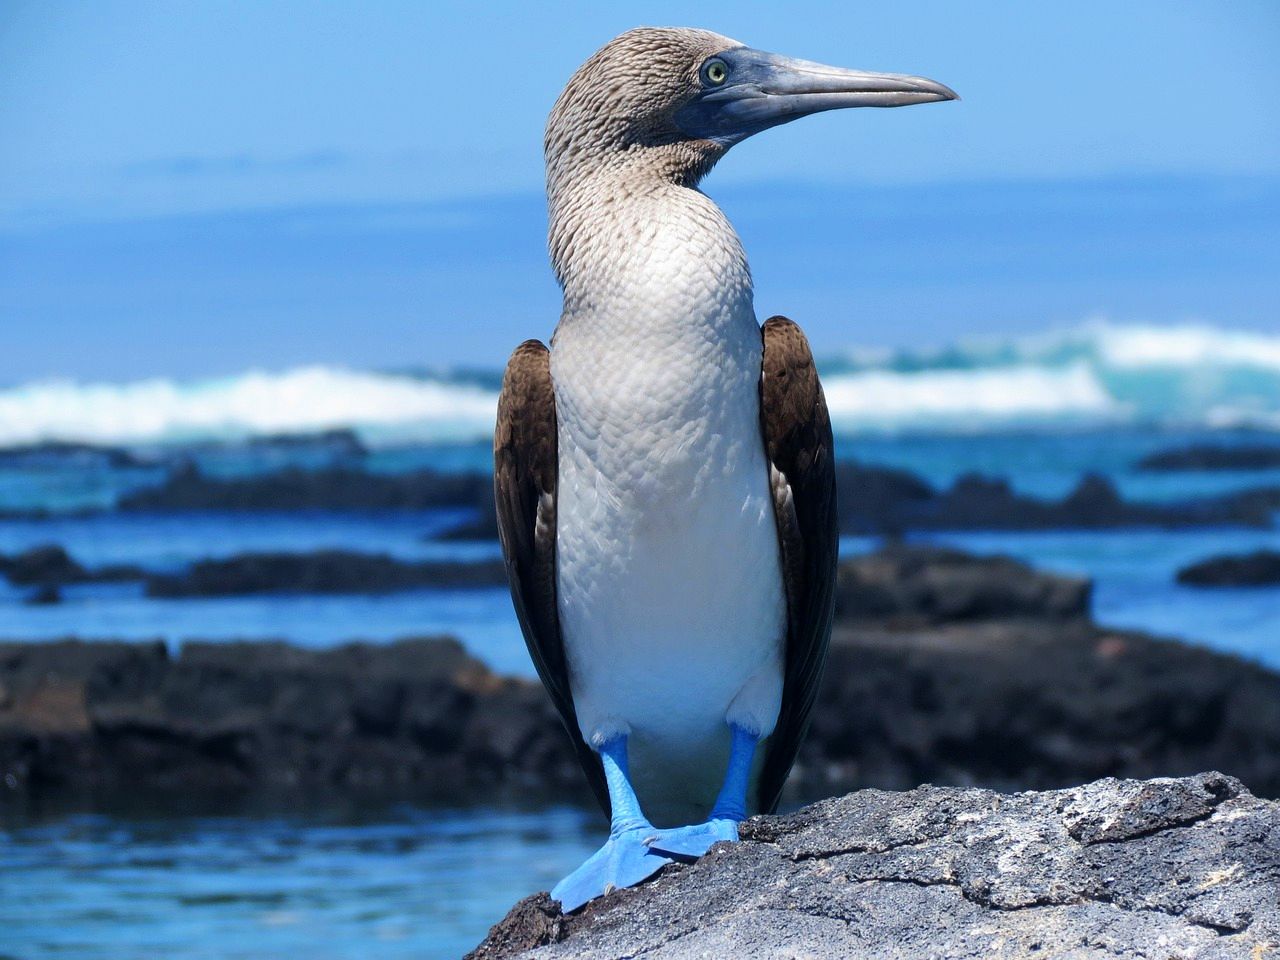 Blue footed booby in the Galapagos Islands of Ecuador